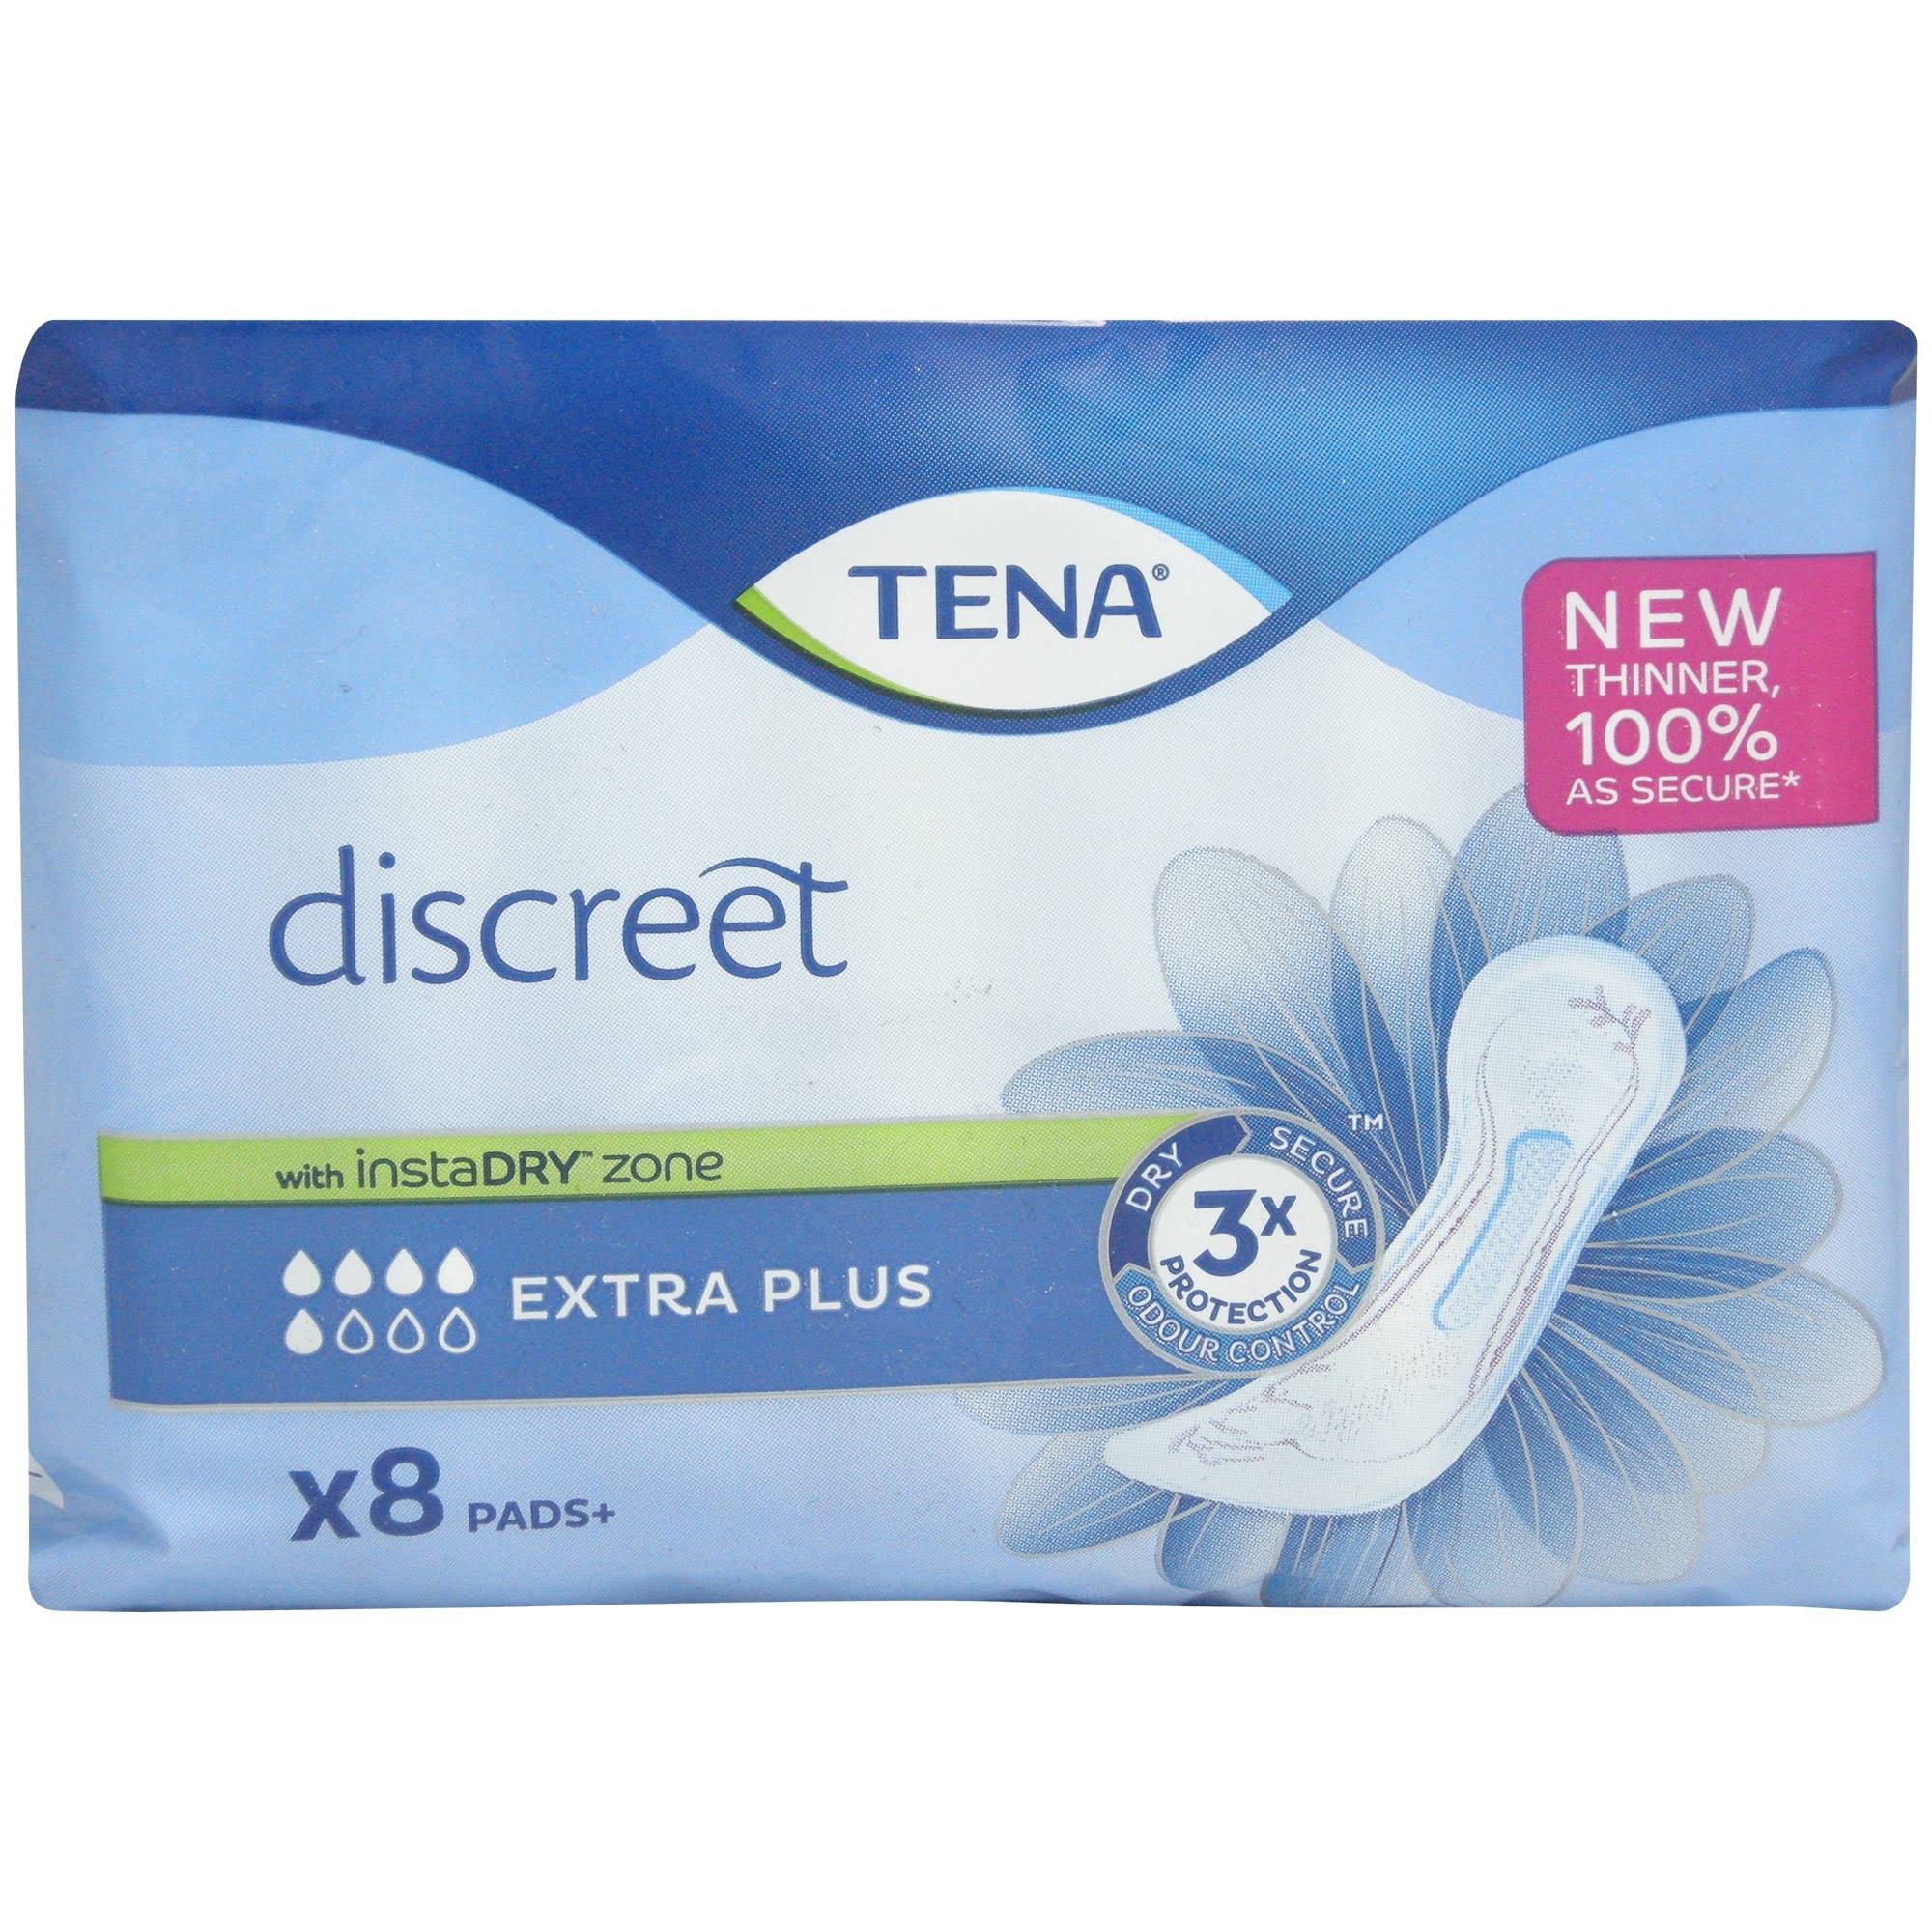 Tena Lady Discreet Extra Plus Incontinence Pads (1 Pack of 8)